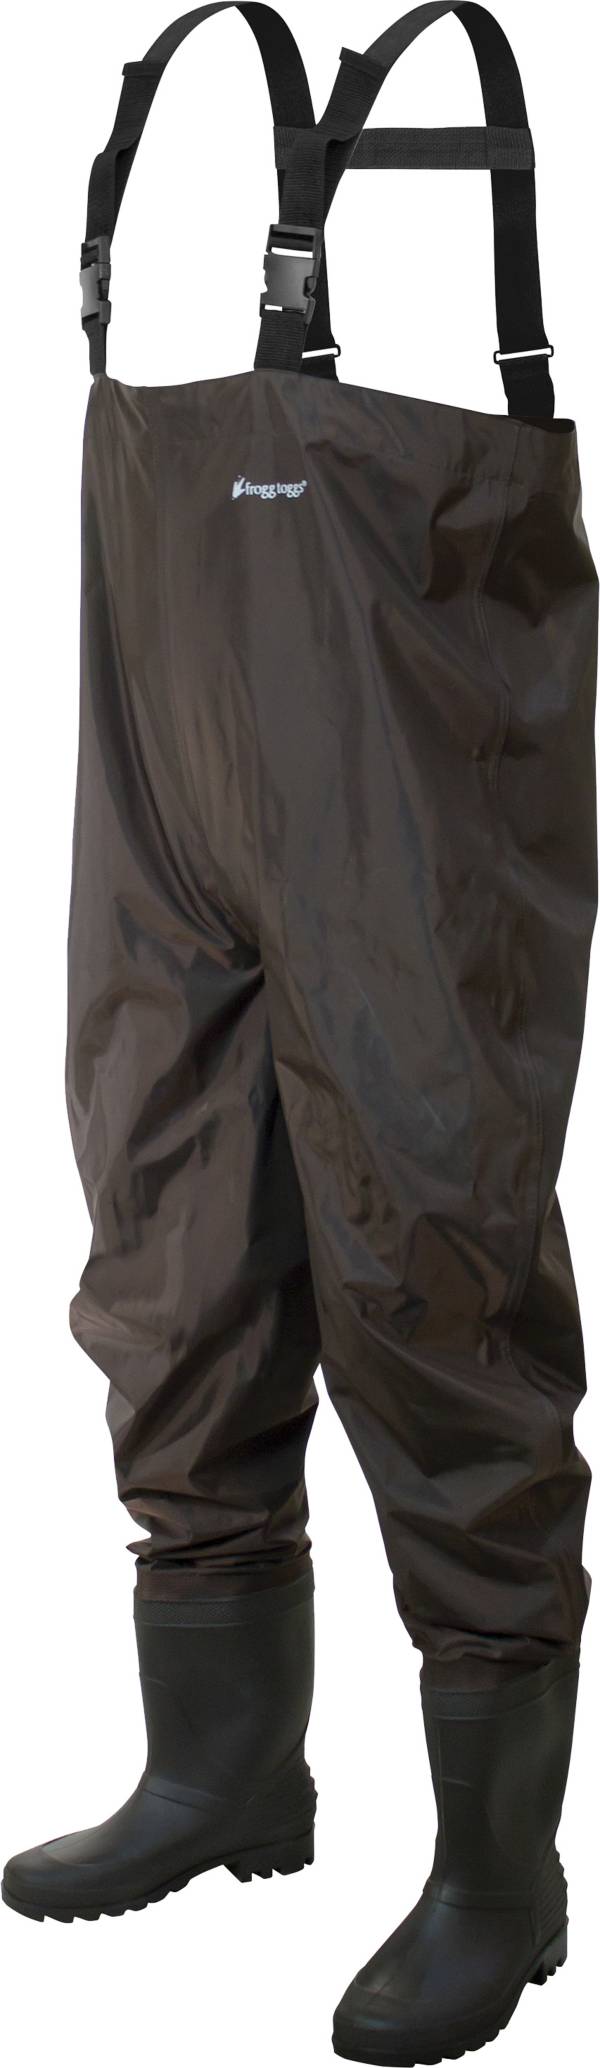 frogg toggs Rana II PVC Cleated Chest Waders product image